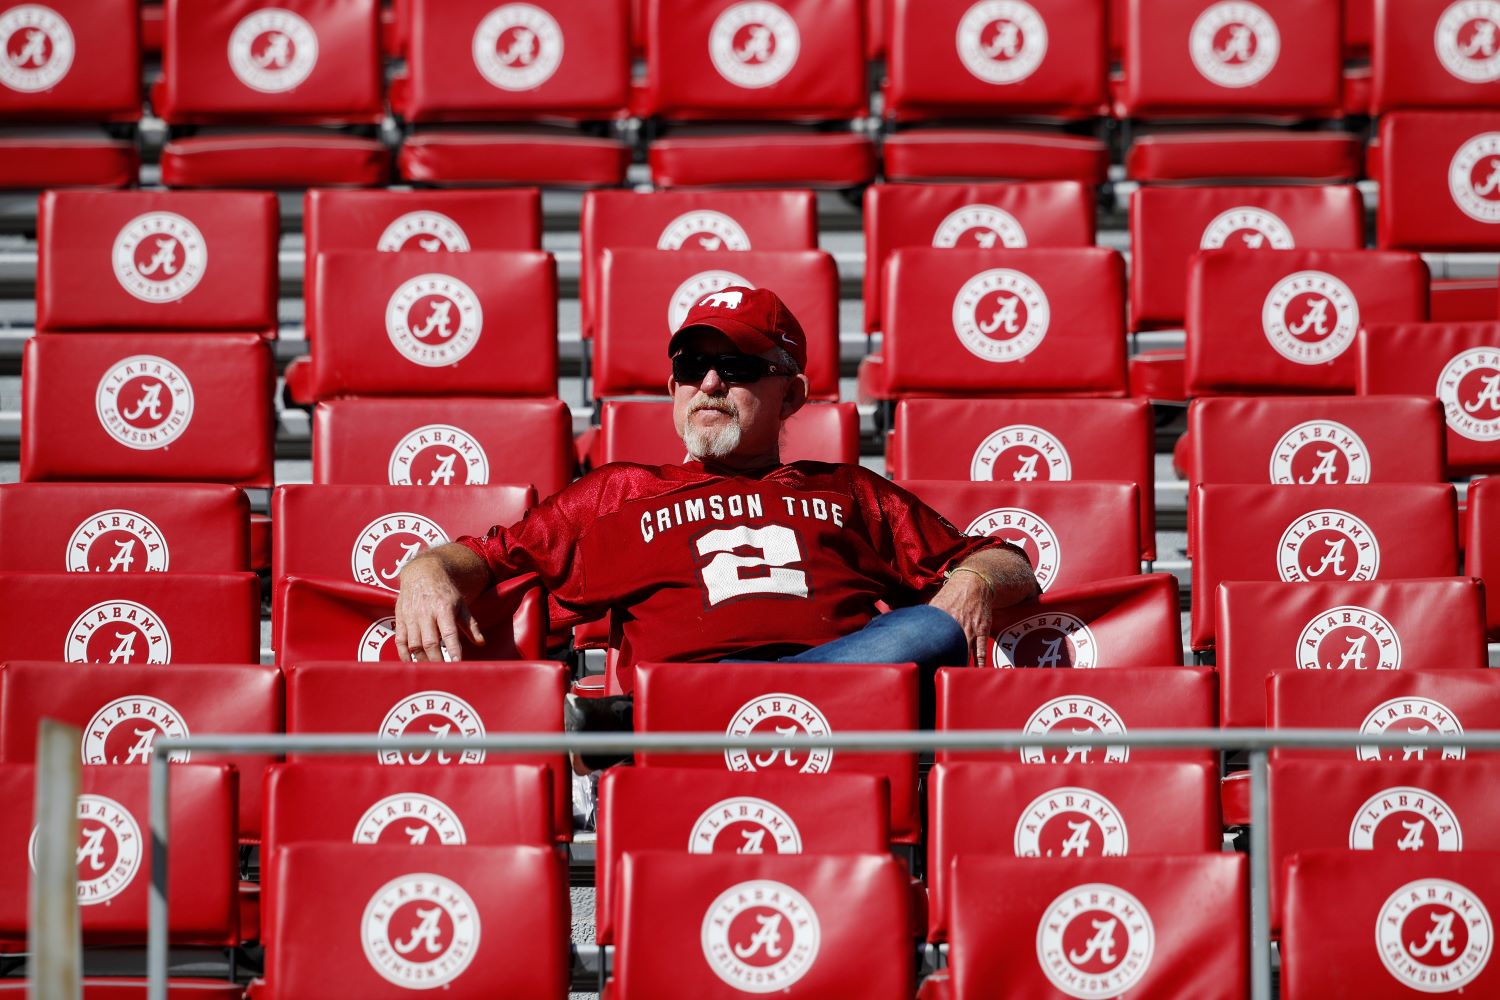 The University of Alabama football program nearly got shut down due to a case involving a player named Albert Means, $150,000, and a phony ACT test.